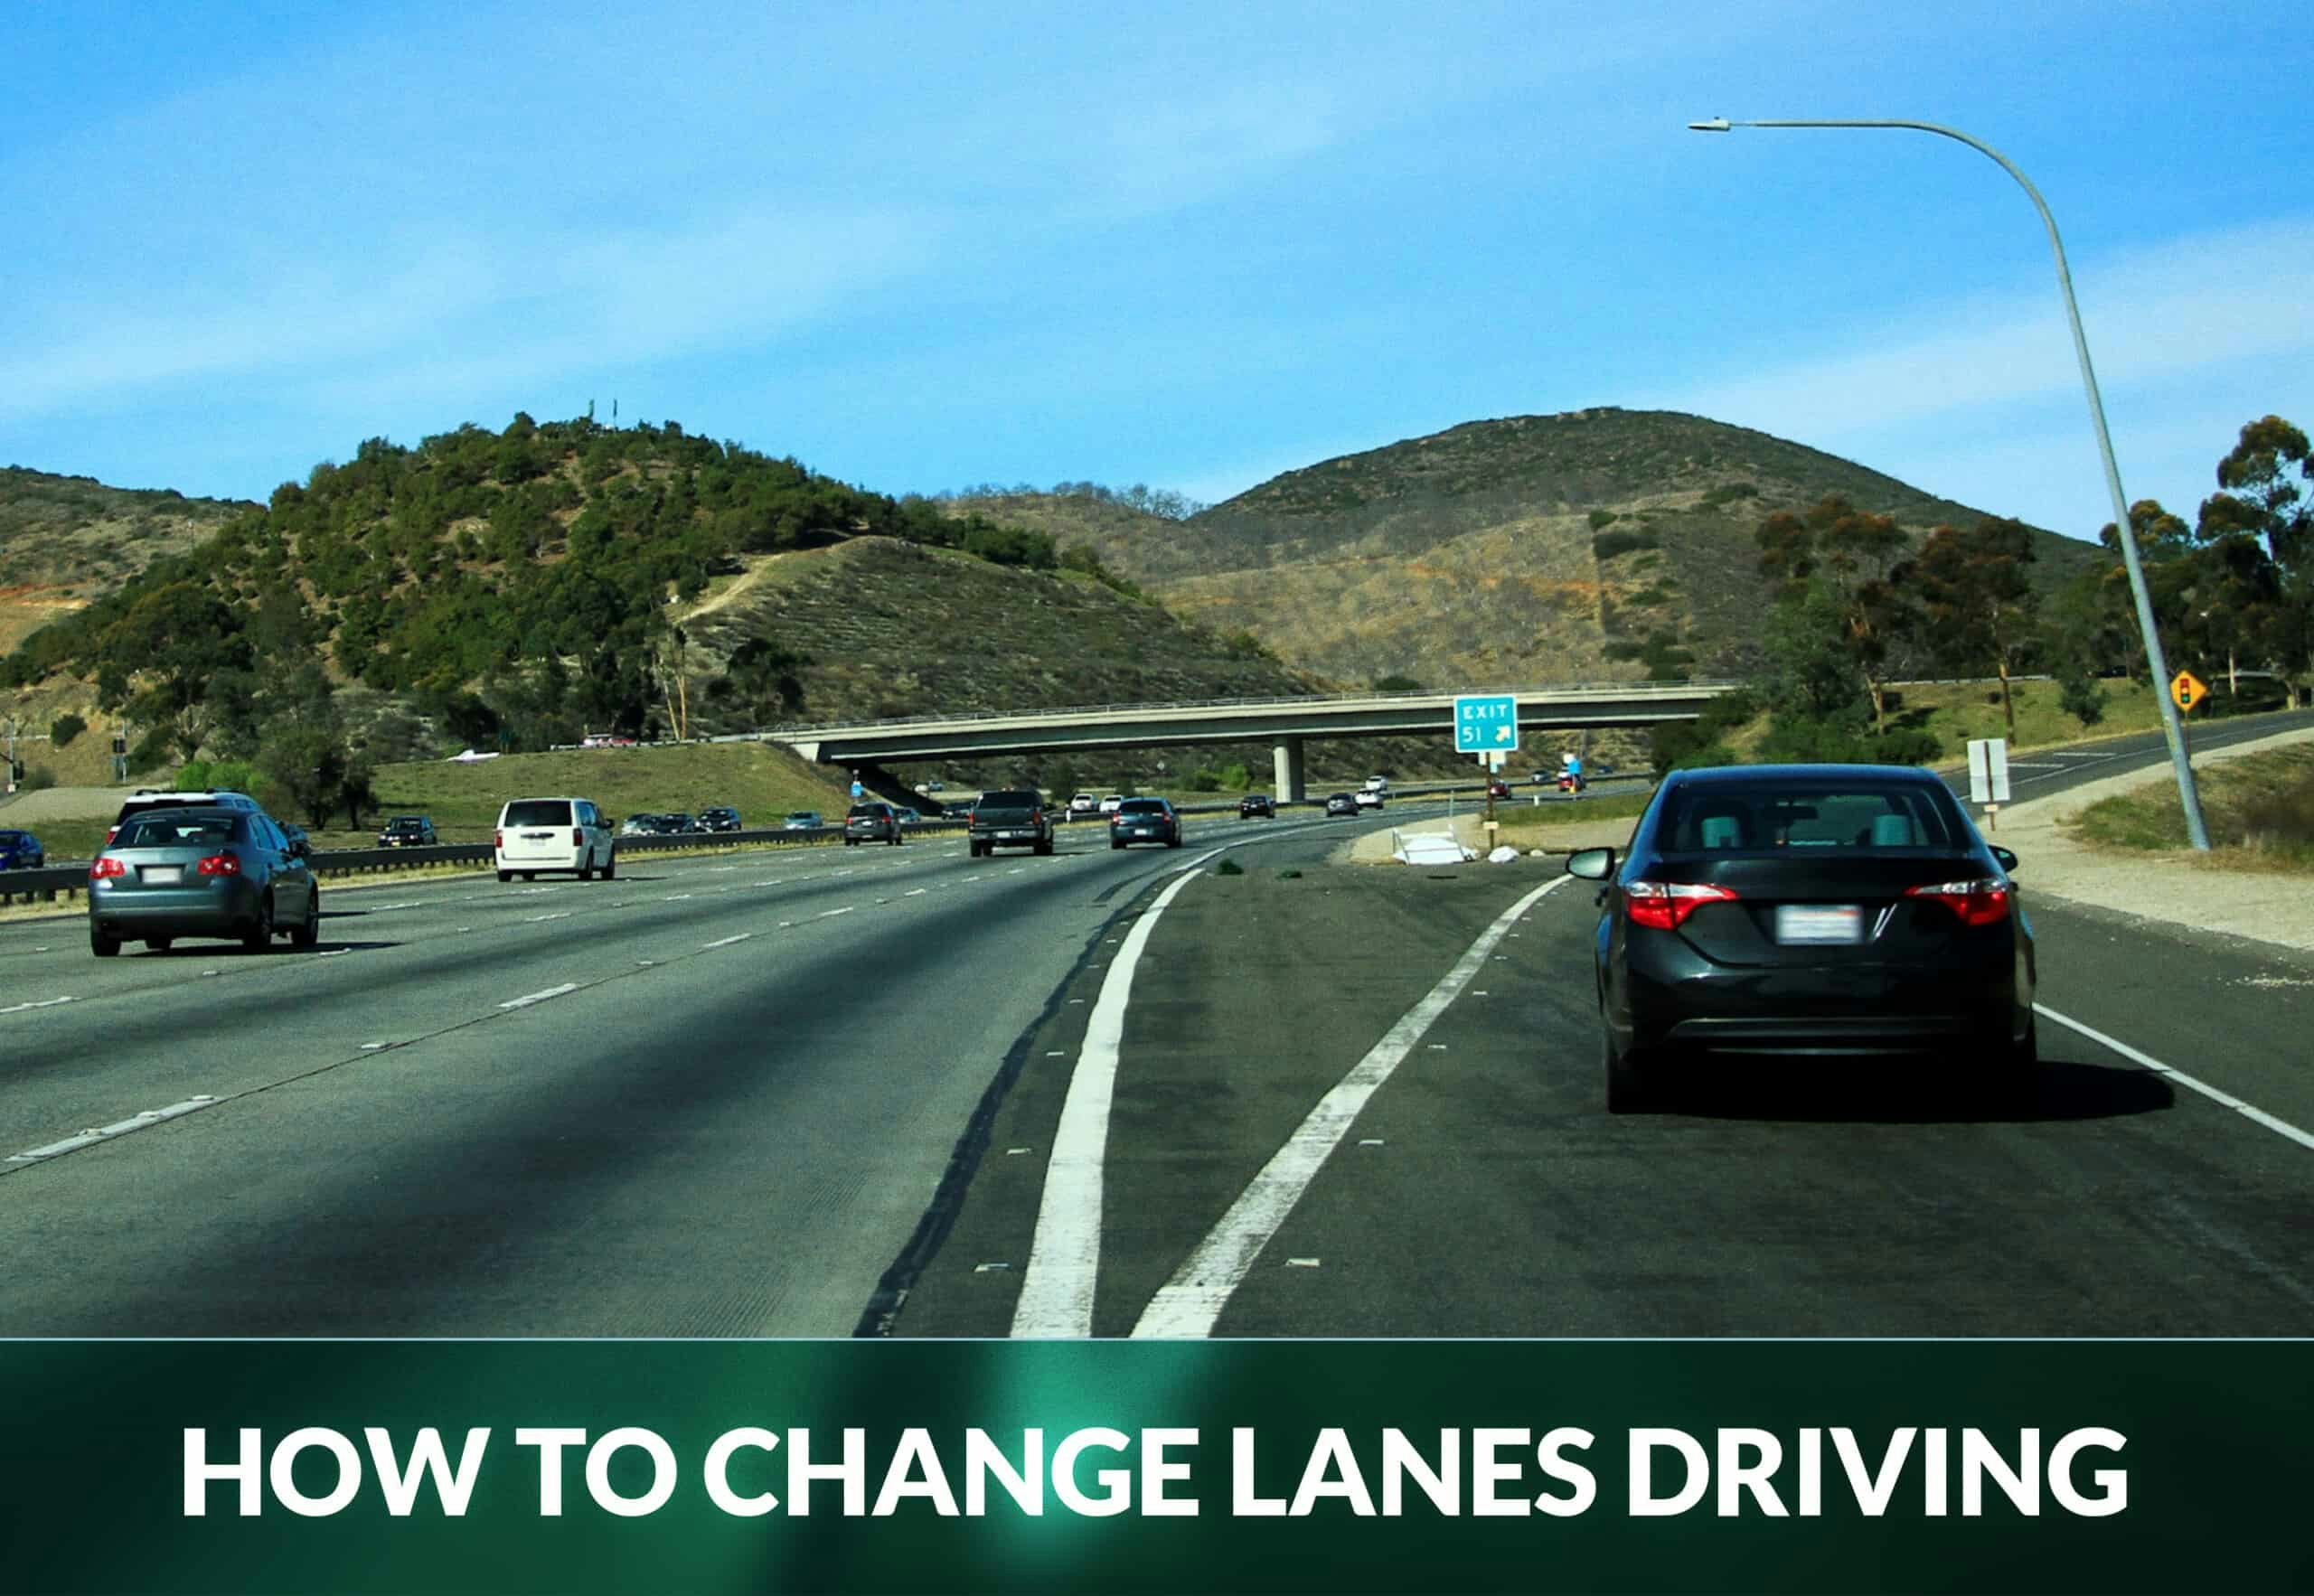 Lane Changing – It's More Than Just Using Your Blinker